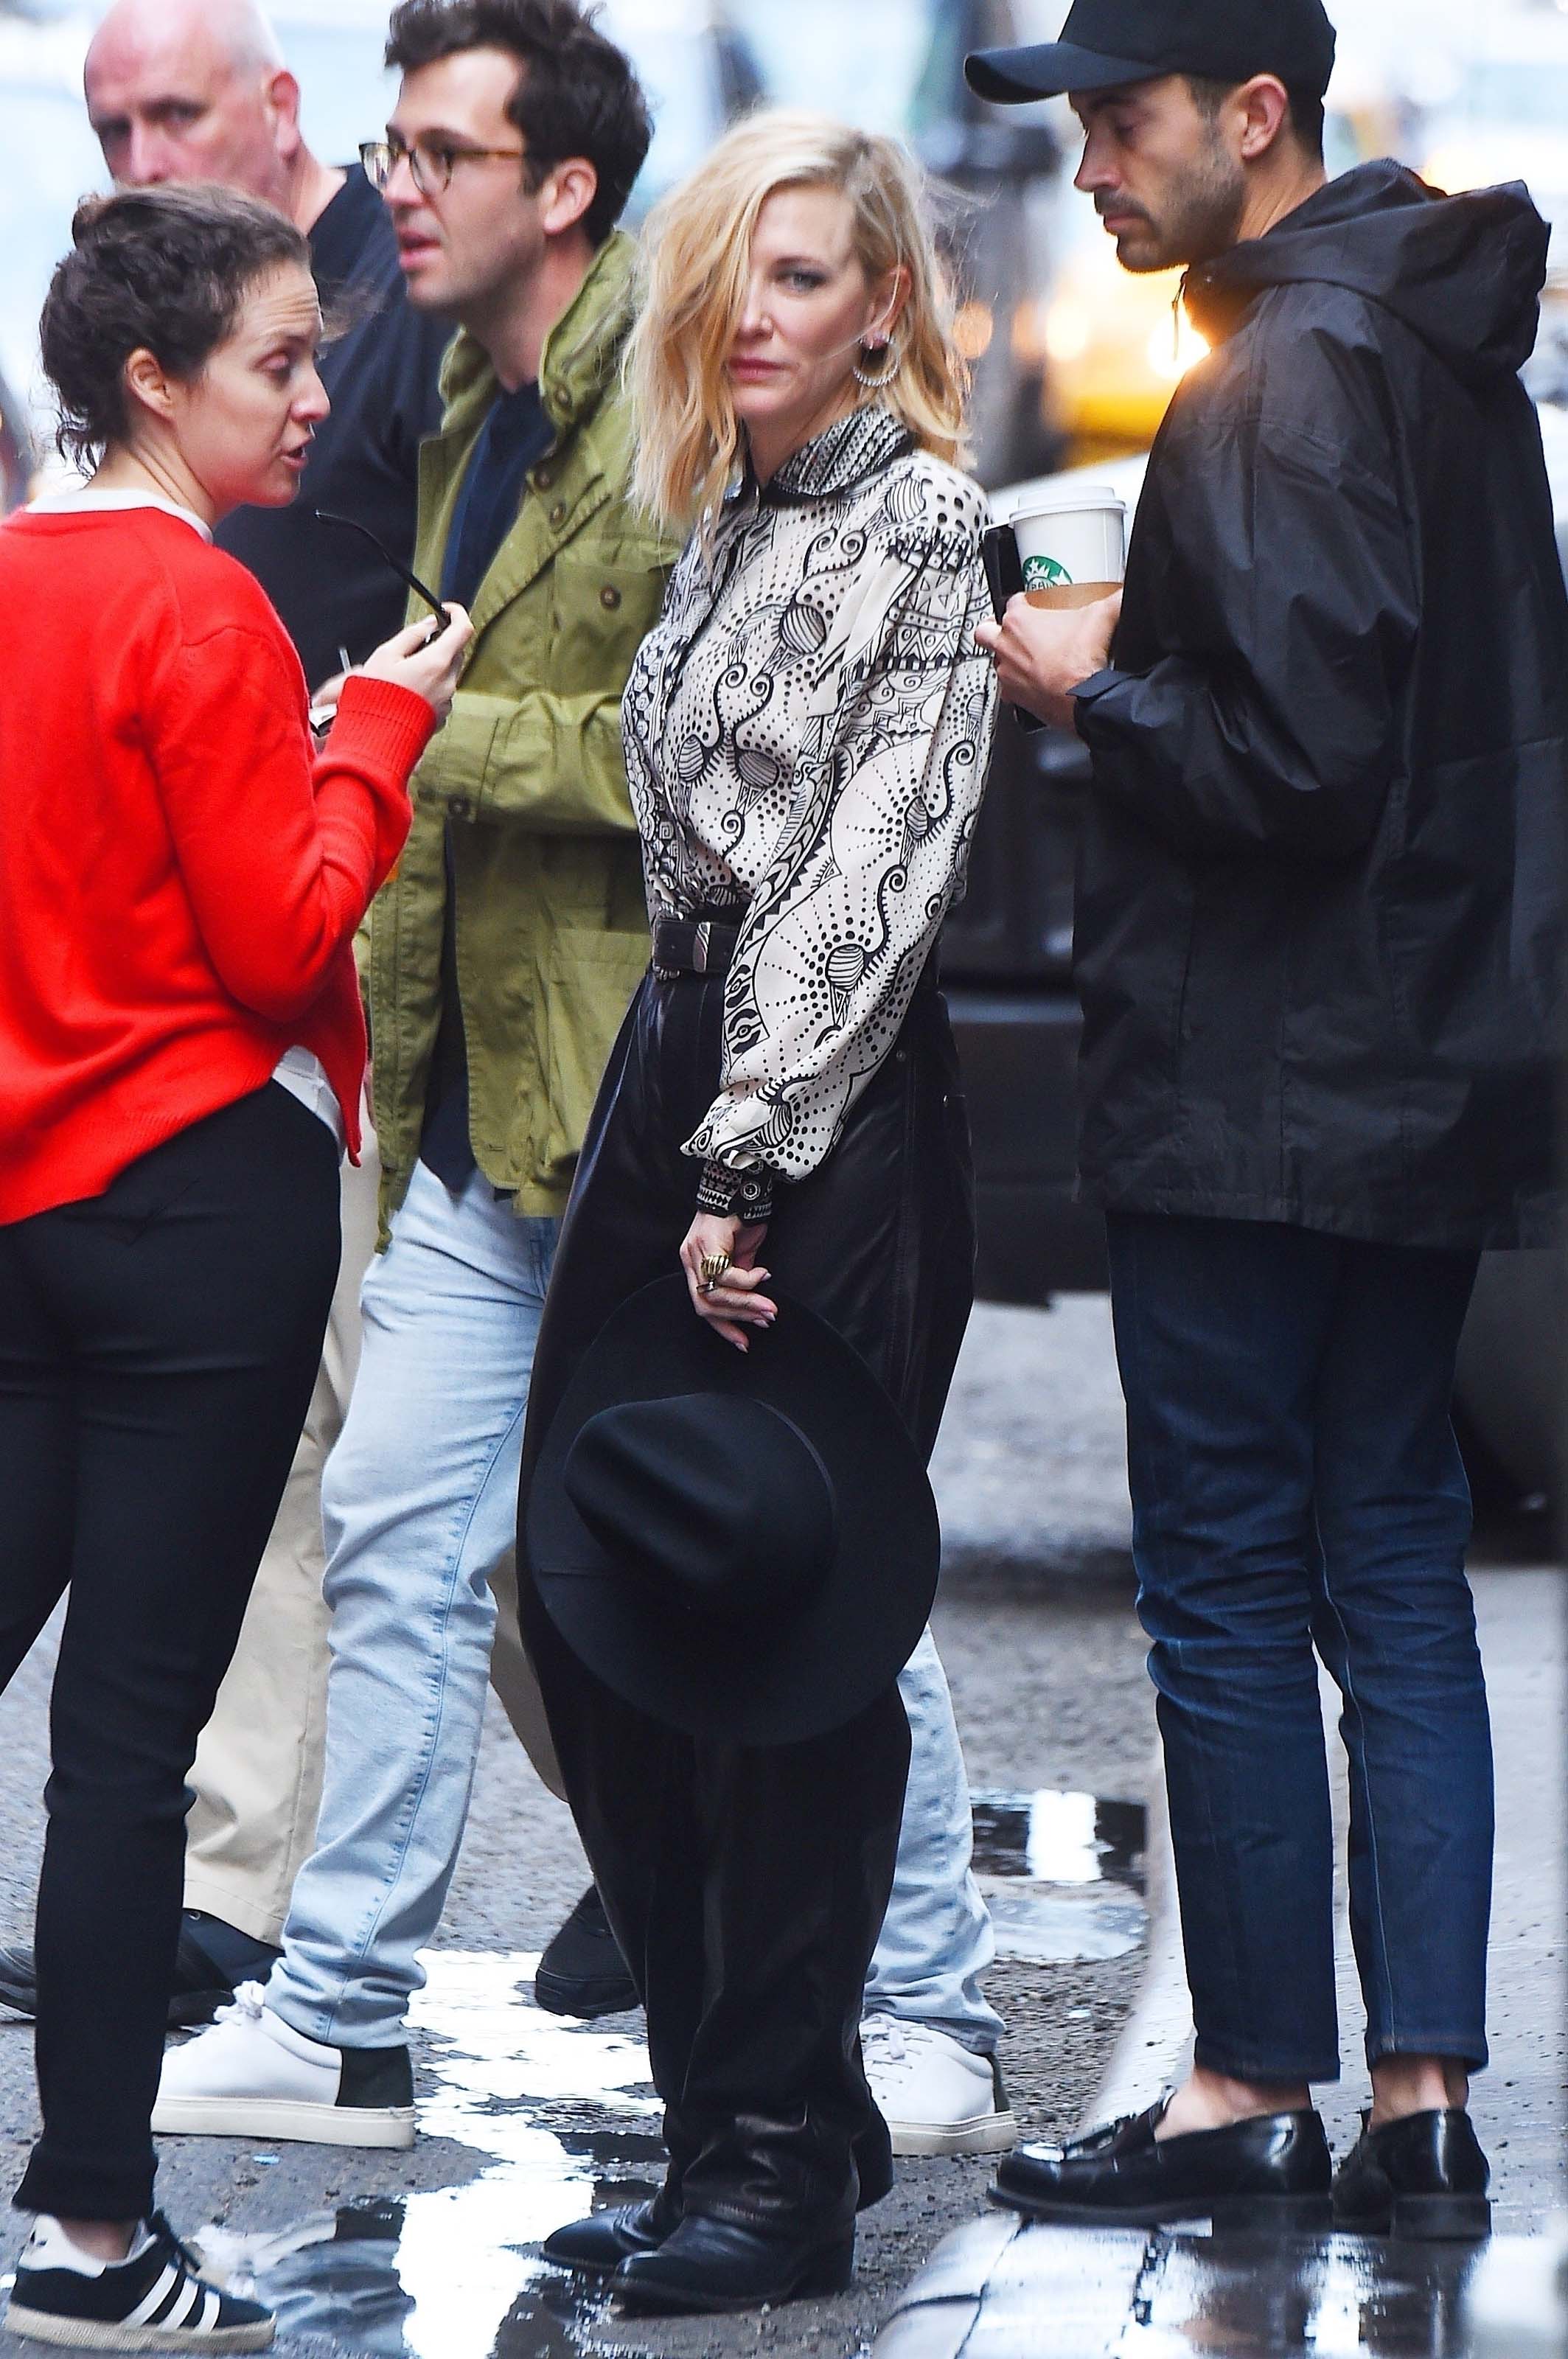 Cate Blanchett on the streets of New York